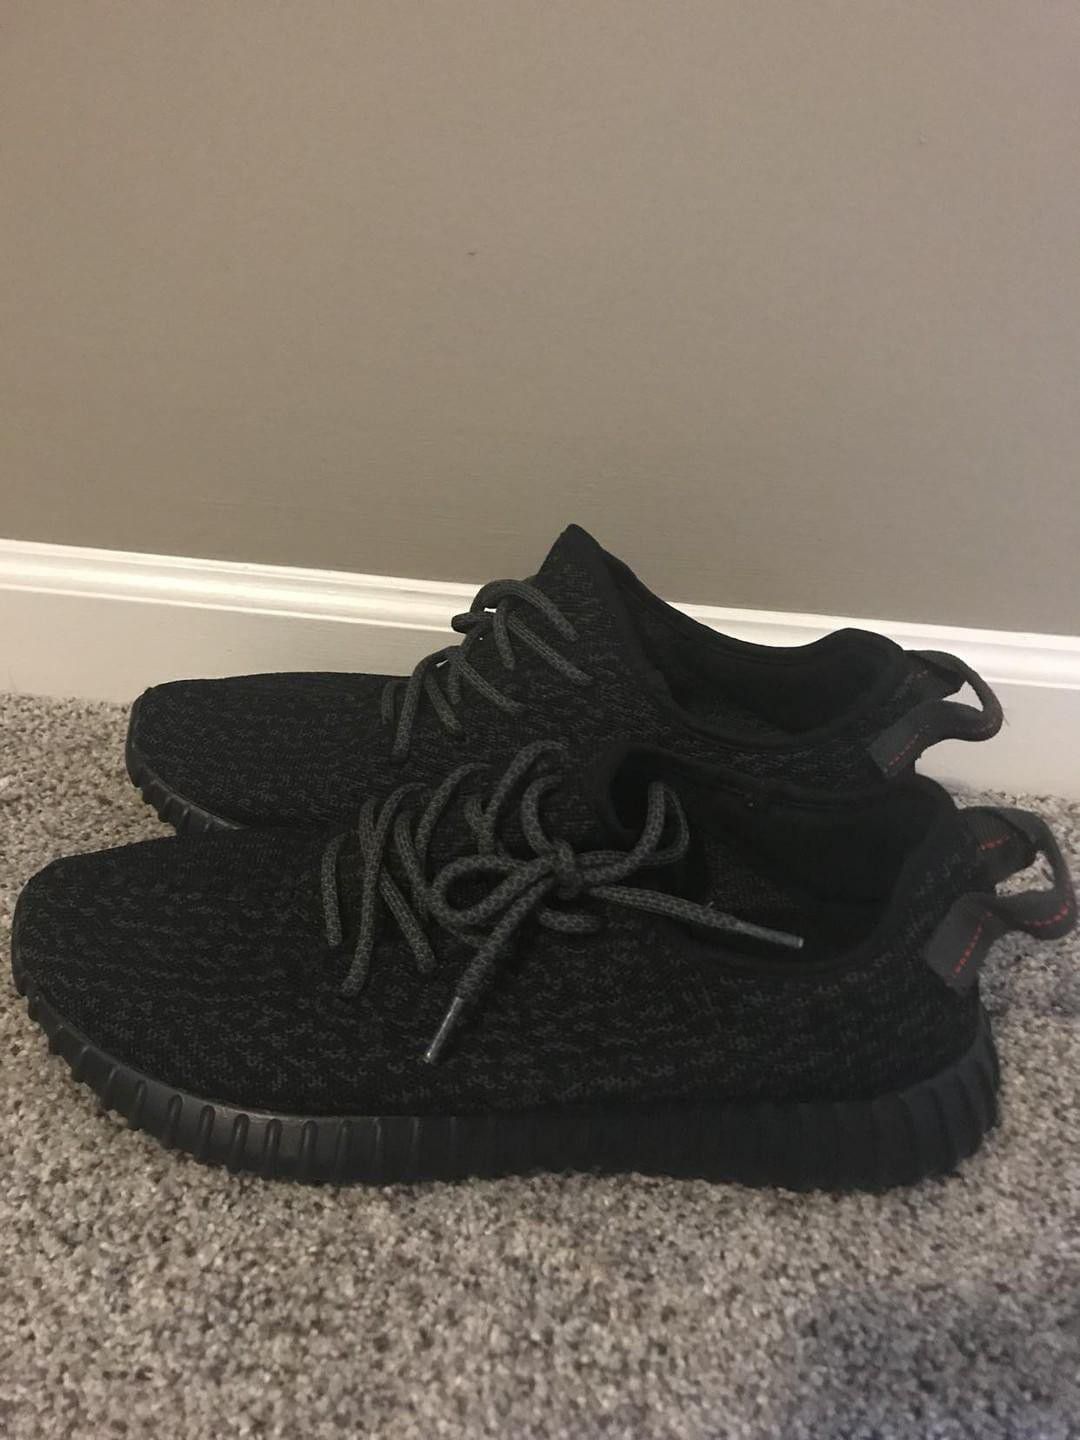 *REAL* Yeezy 350 boost pirate black Size 11